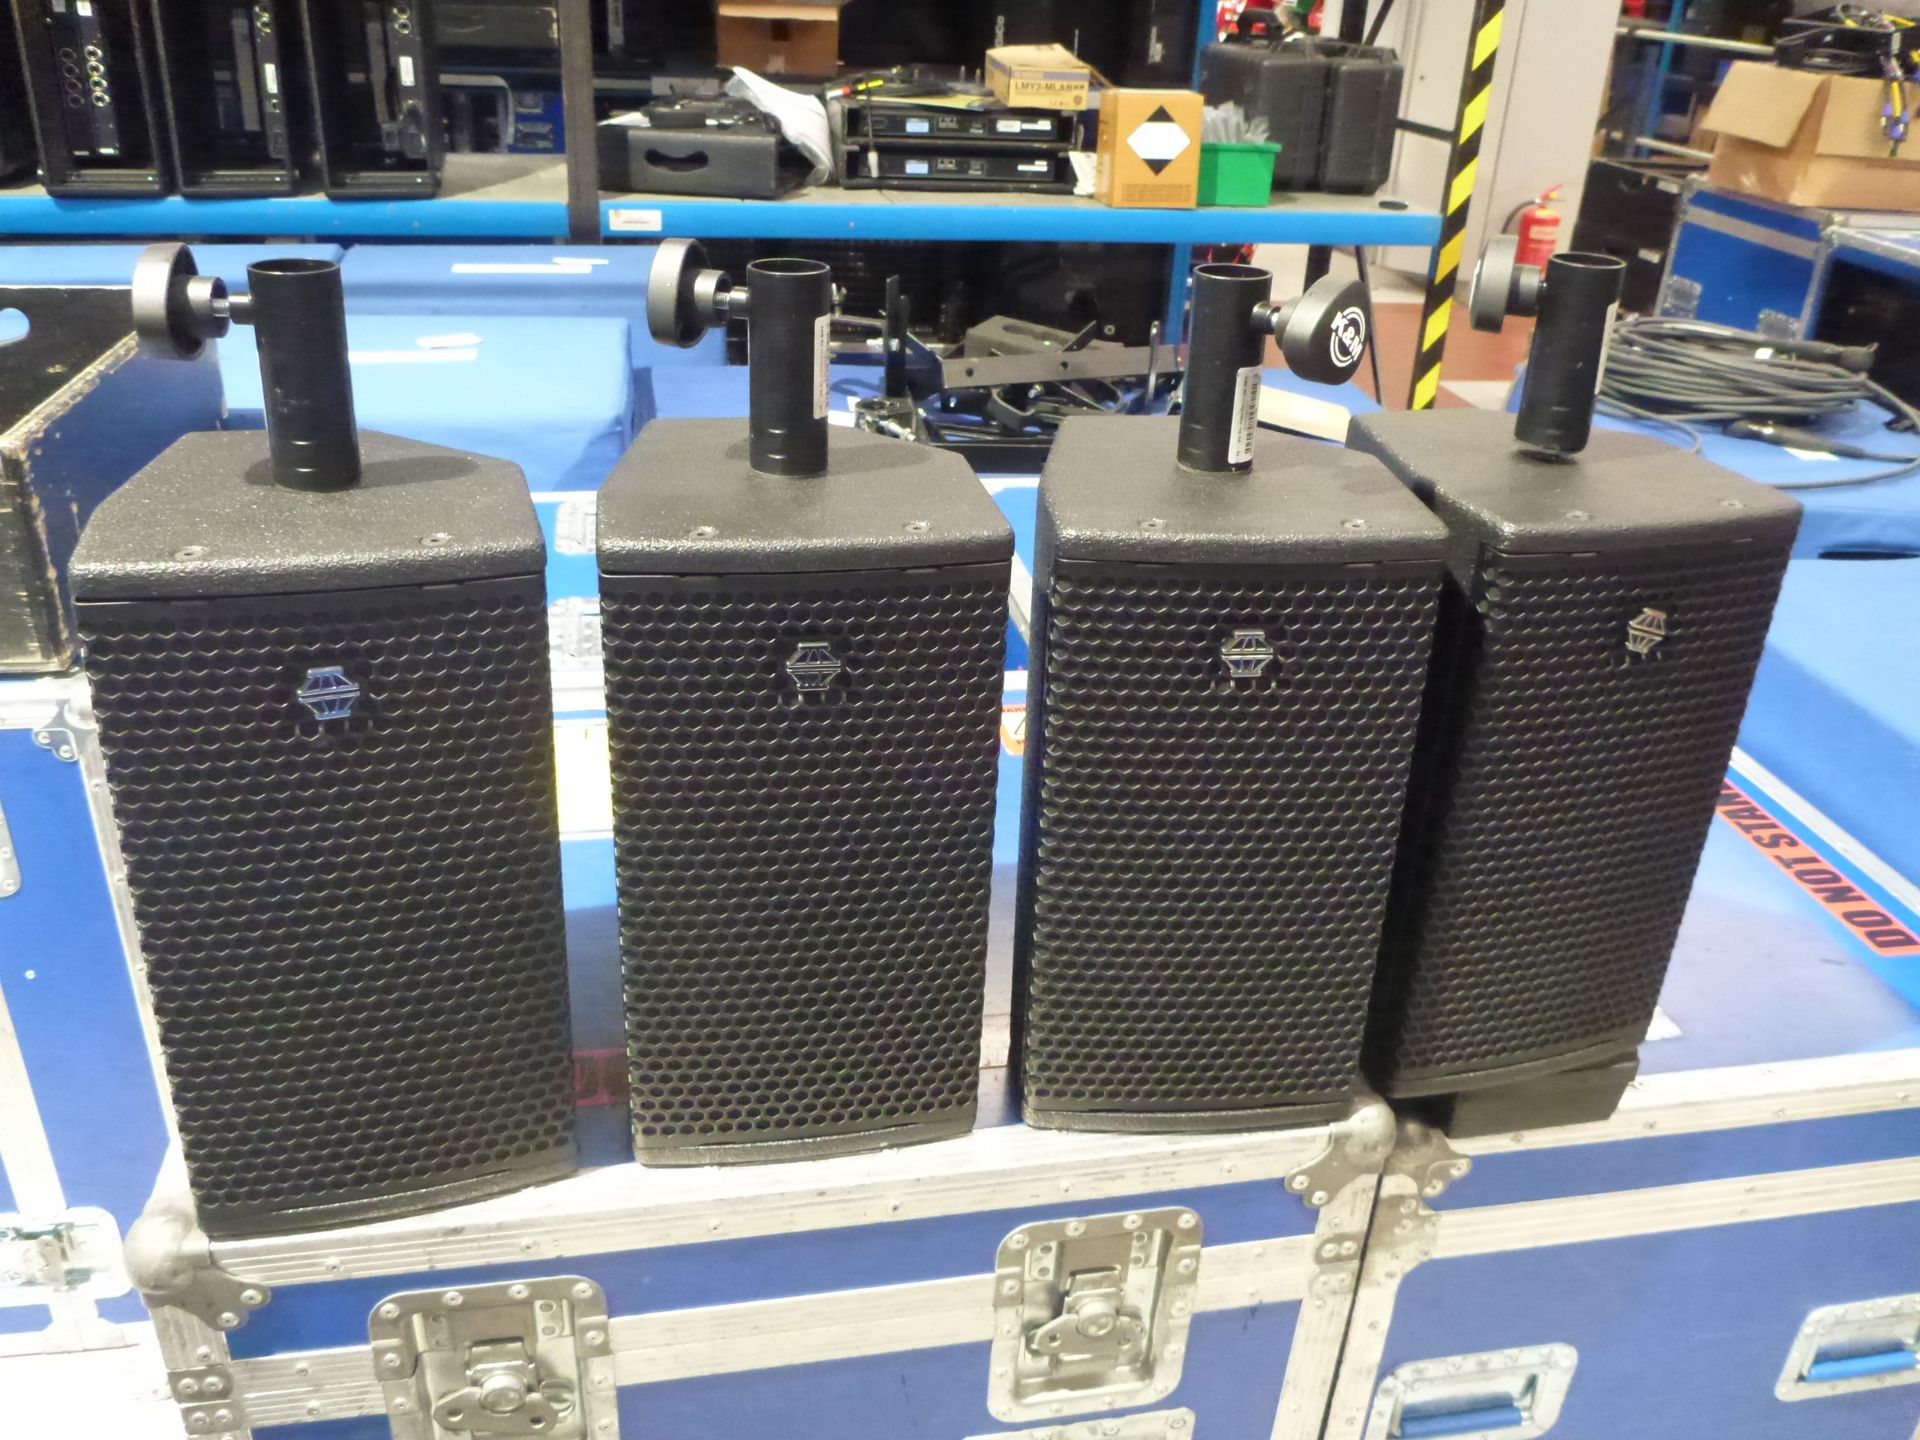 EM Acoustics EMS-61 Loundspeakers (Qty 4) In flight case with top hat, flying frame and safety